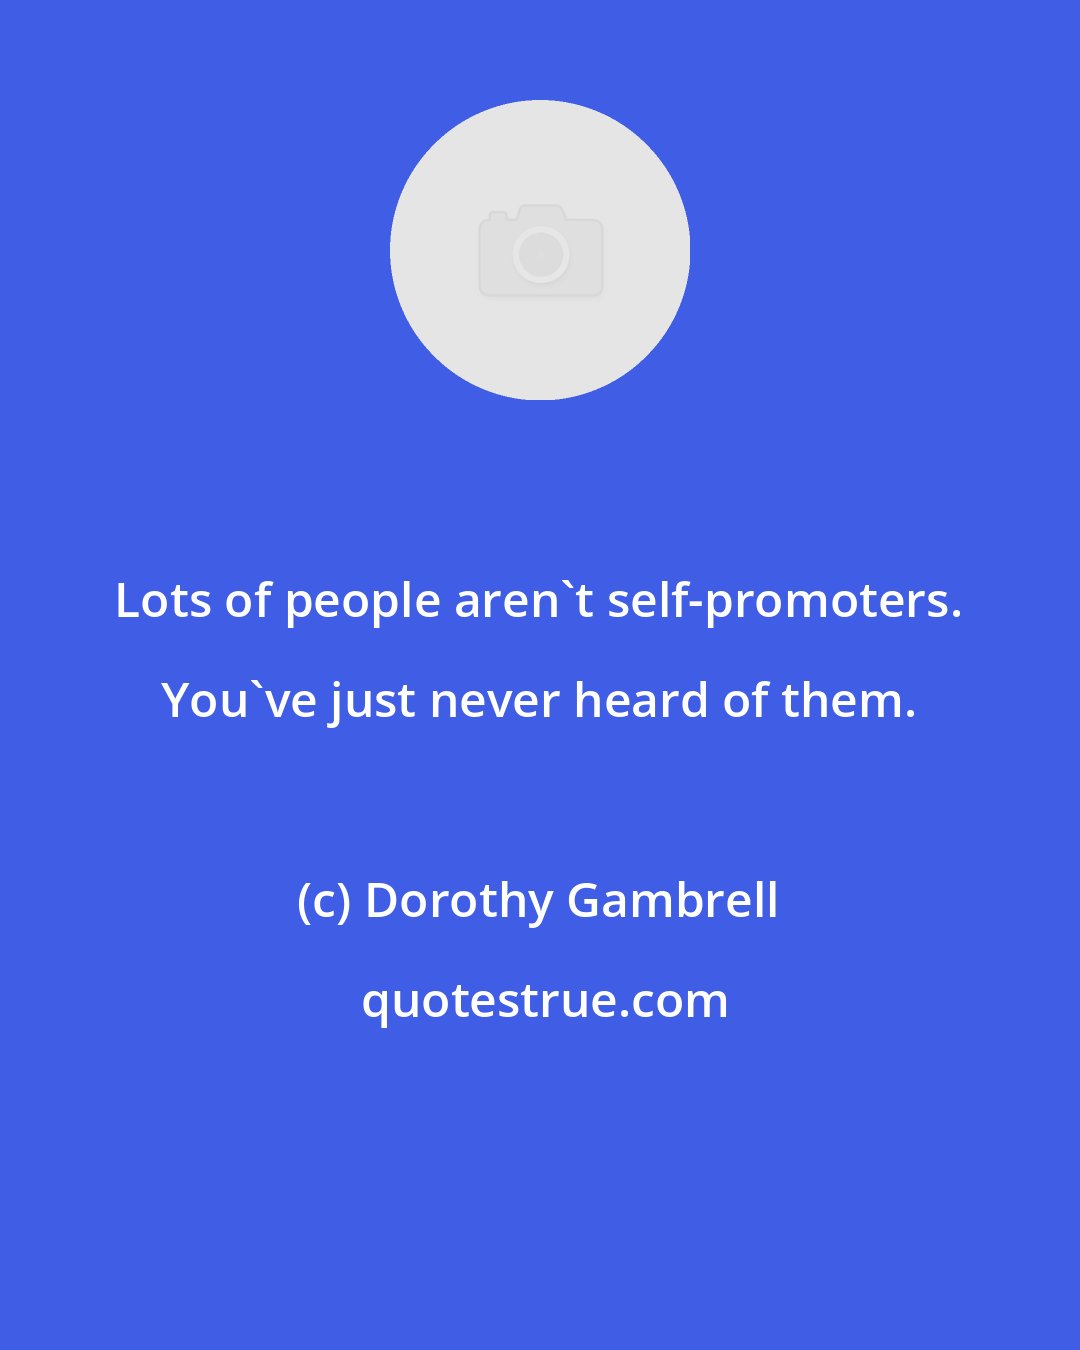 Dorothy Gambrell: Lots of people aren't self-promoters. You've just never heard of them.